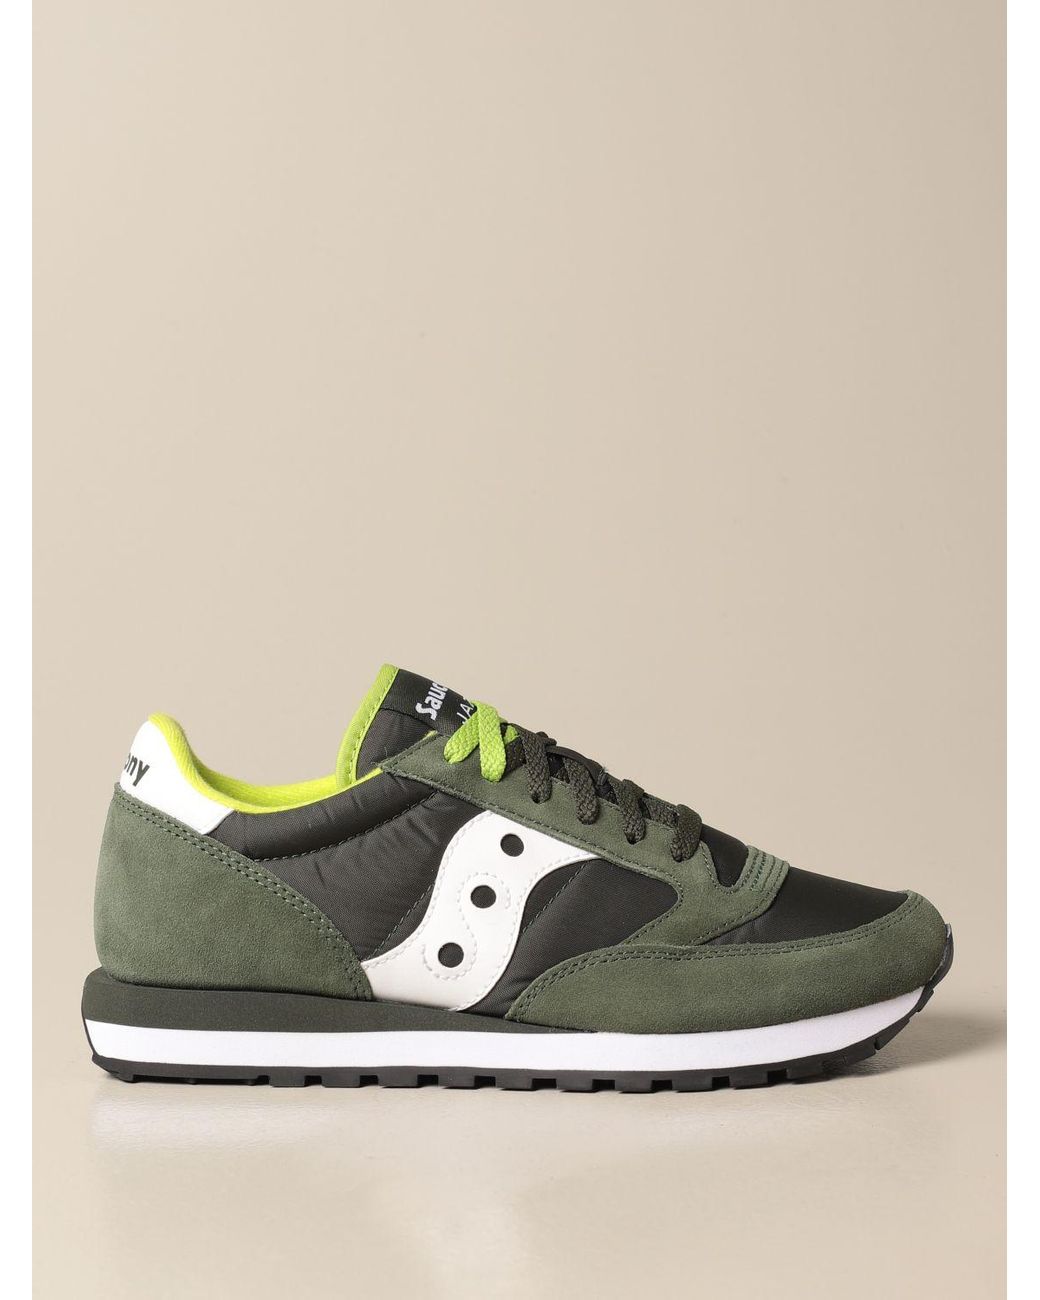 Saucony Synthetic Sneakers in Green for Men - Lyst